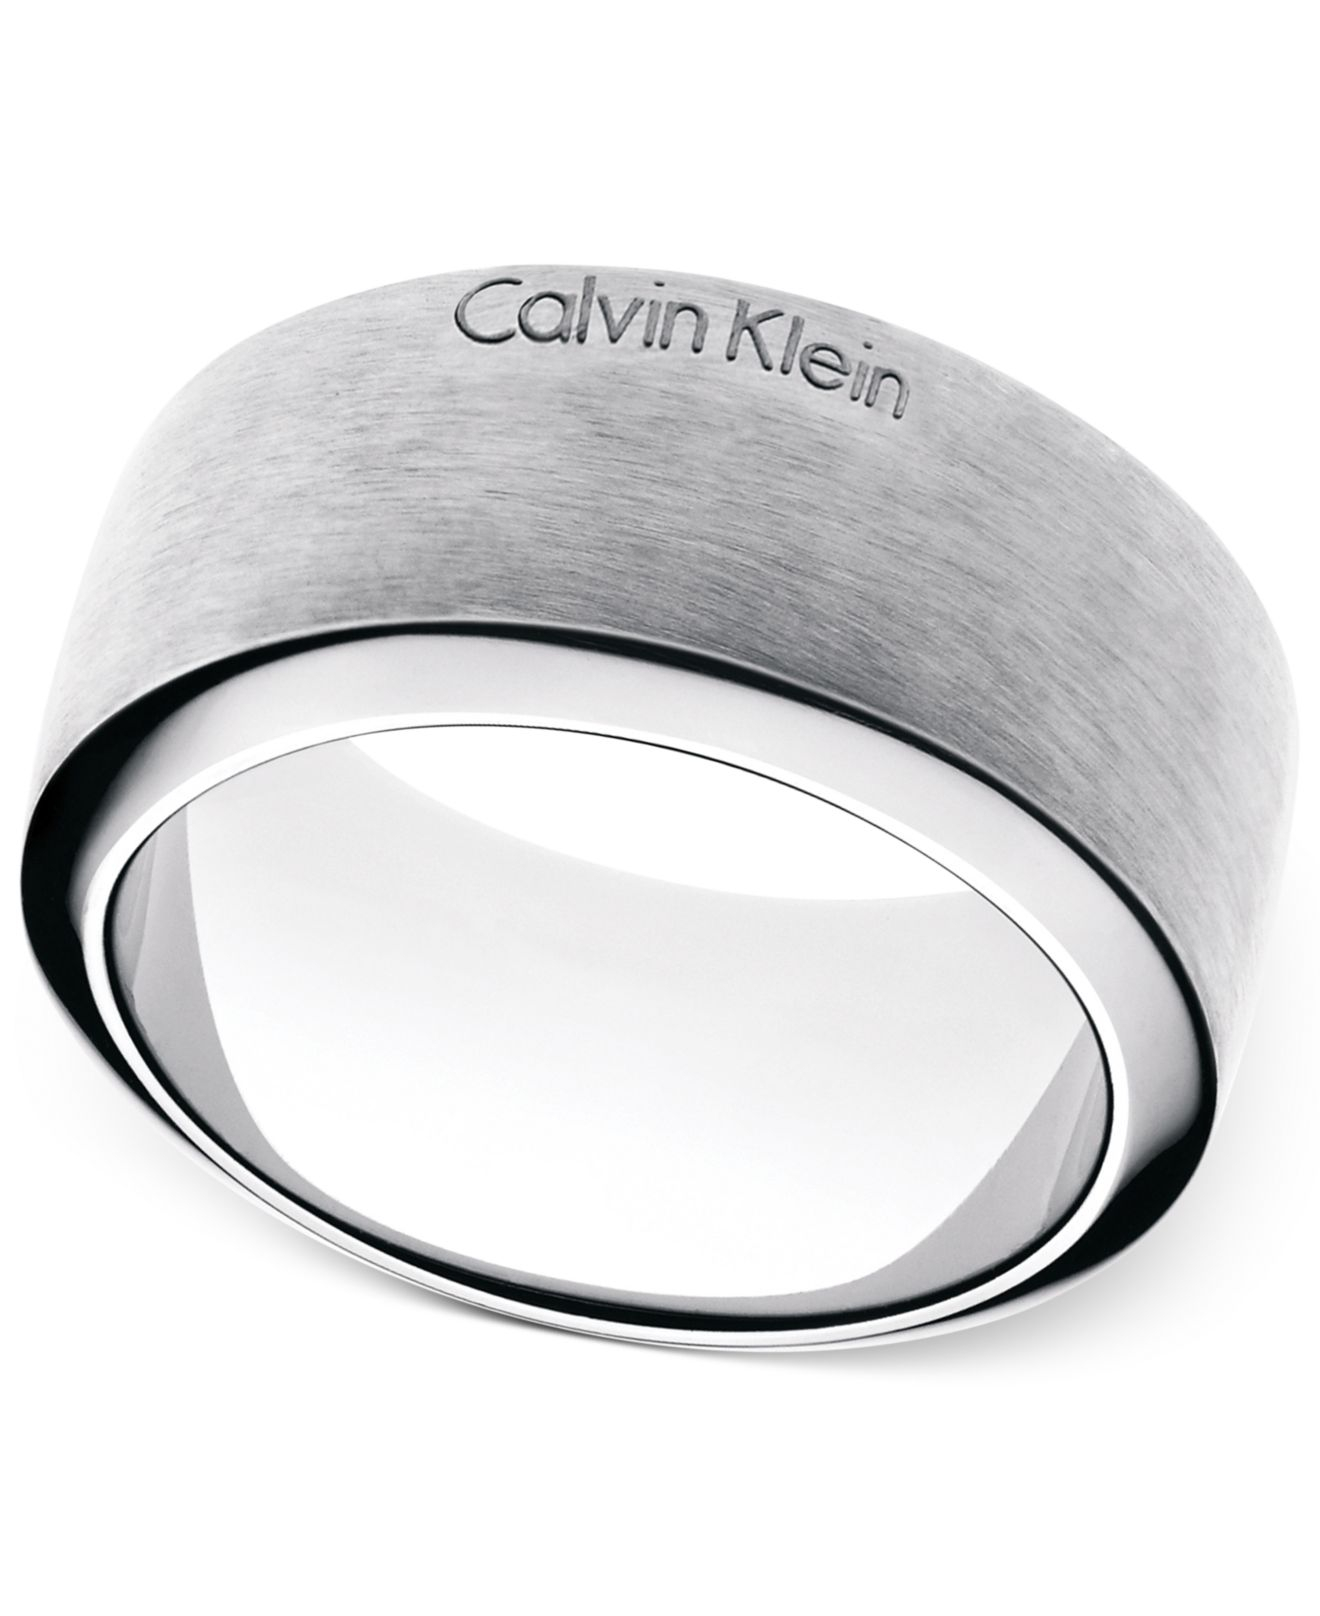 Calvin Klein Stainless Steel Polished And Brushed Double Band Ring in  Metallic for Men - Lyst